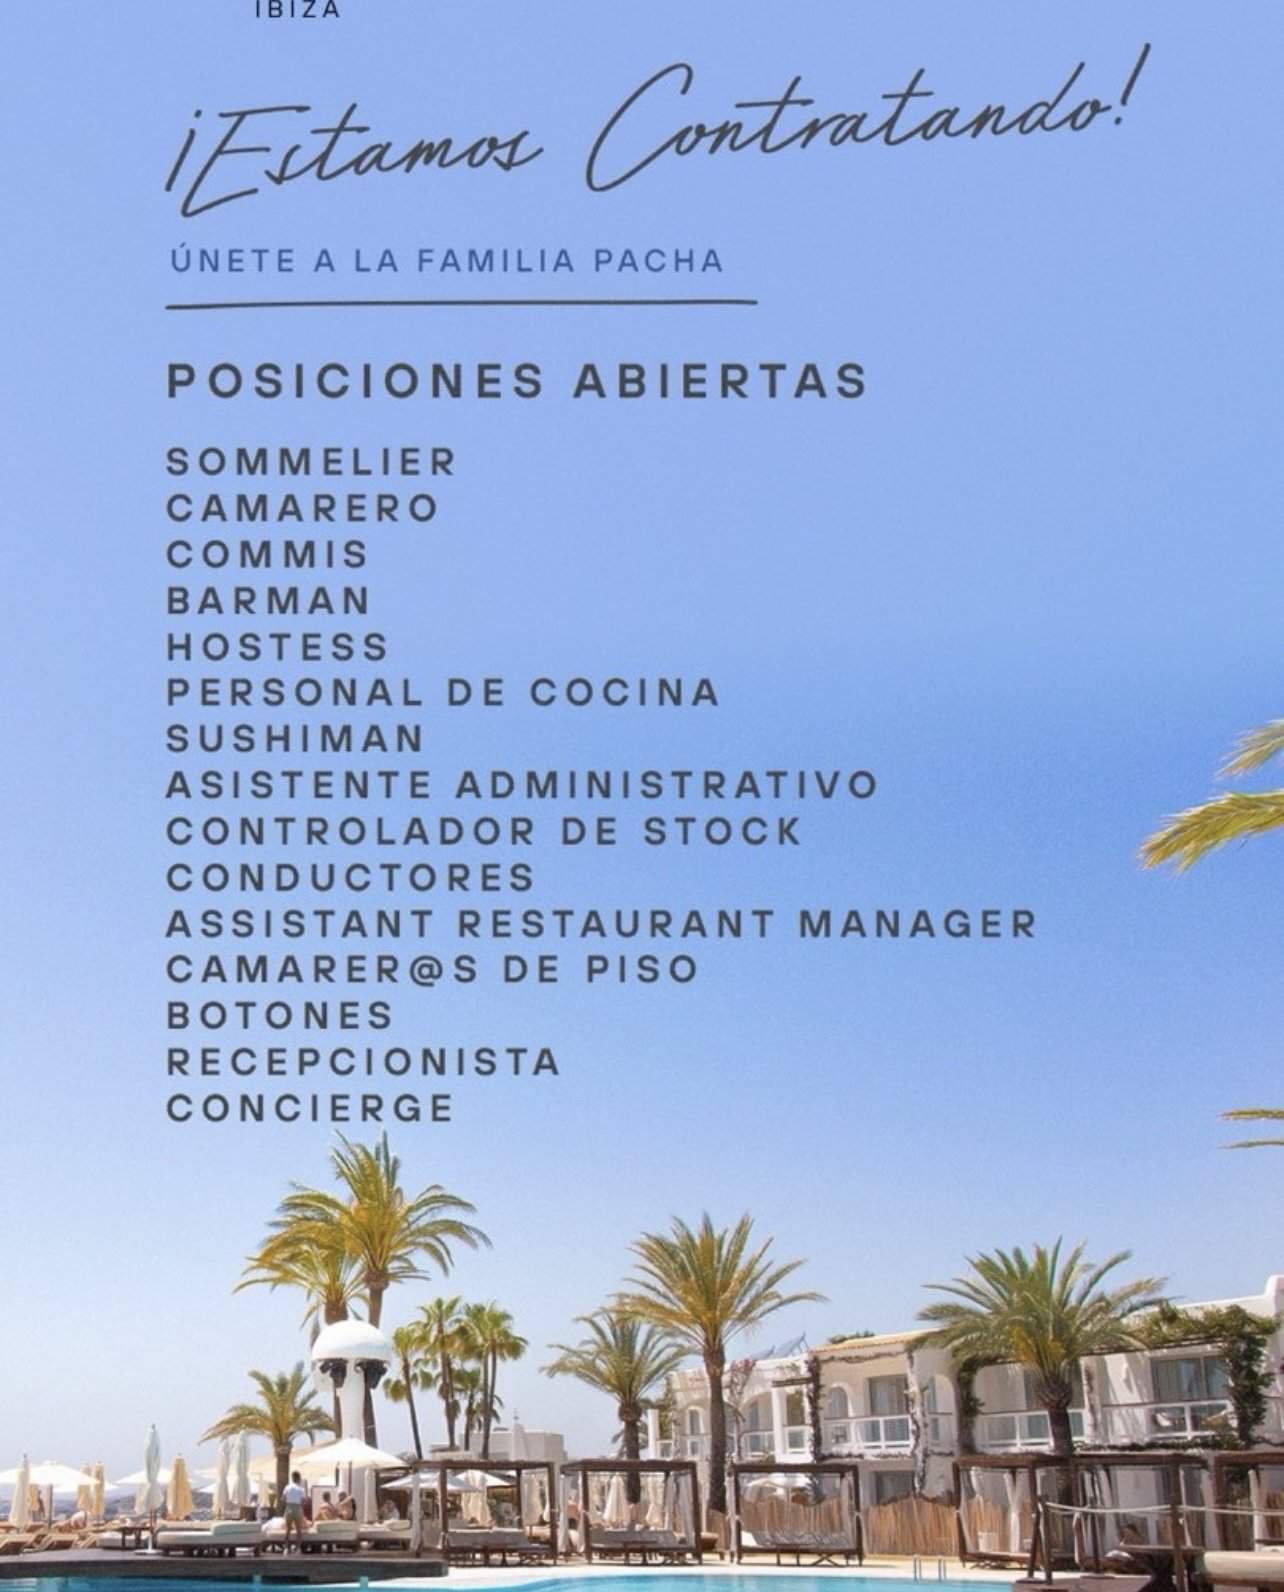 Work in Ibiza 2024: Destination Pacha Ibiza is looking for staff